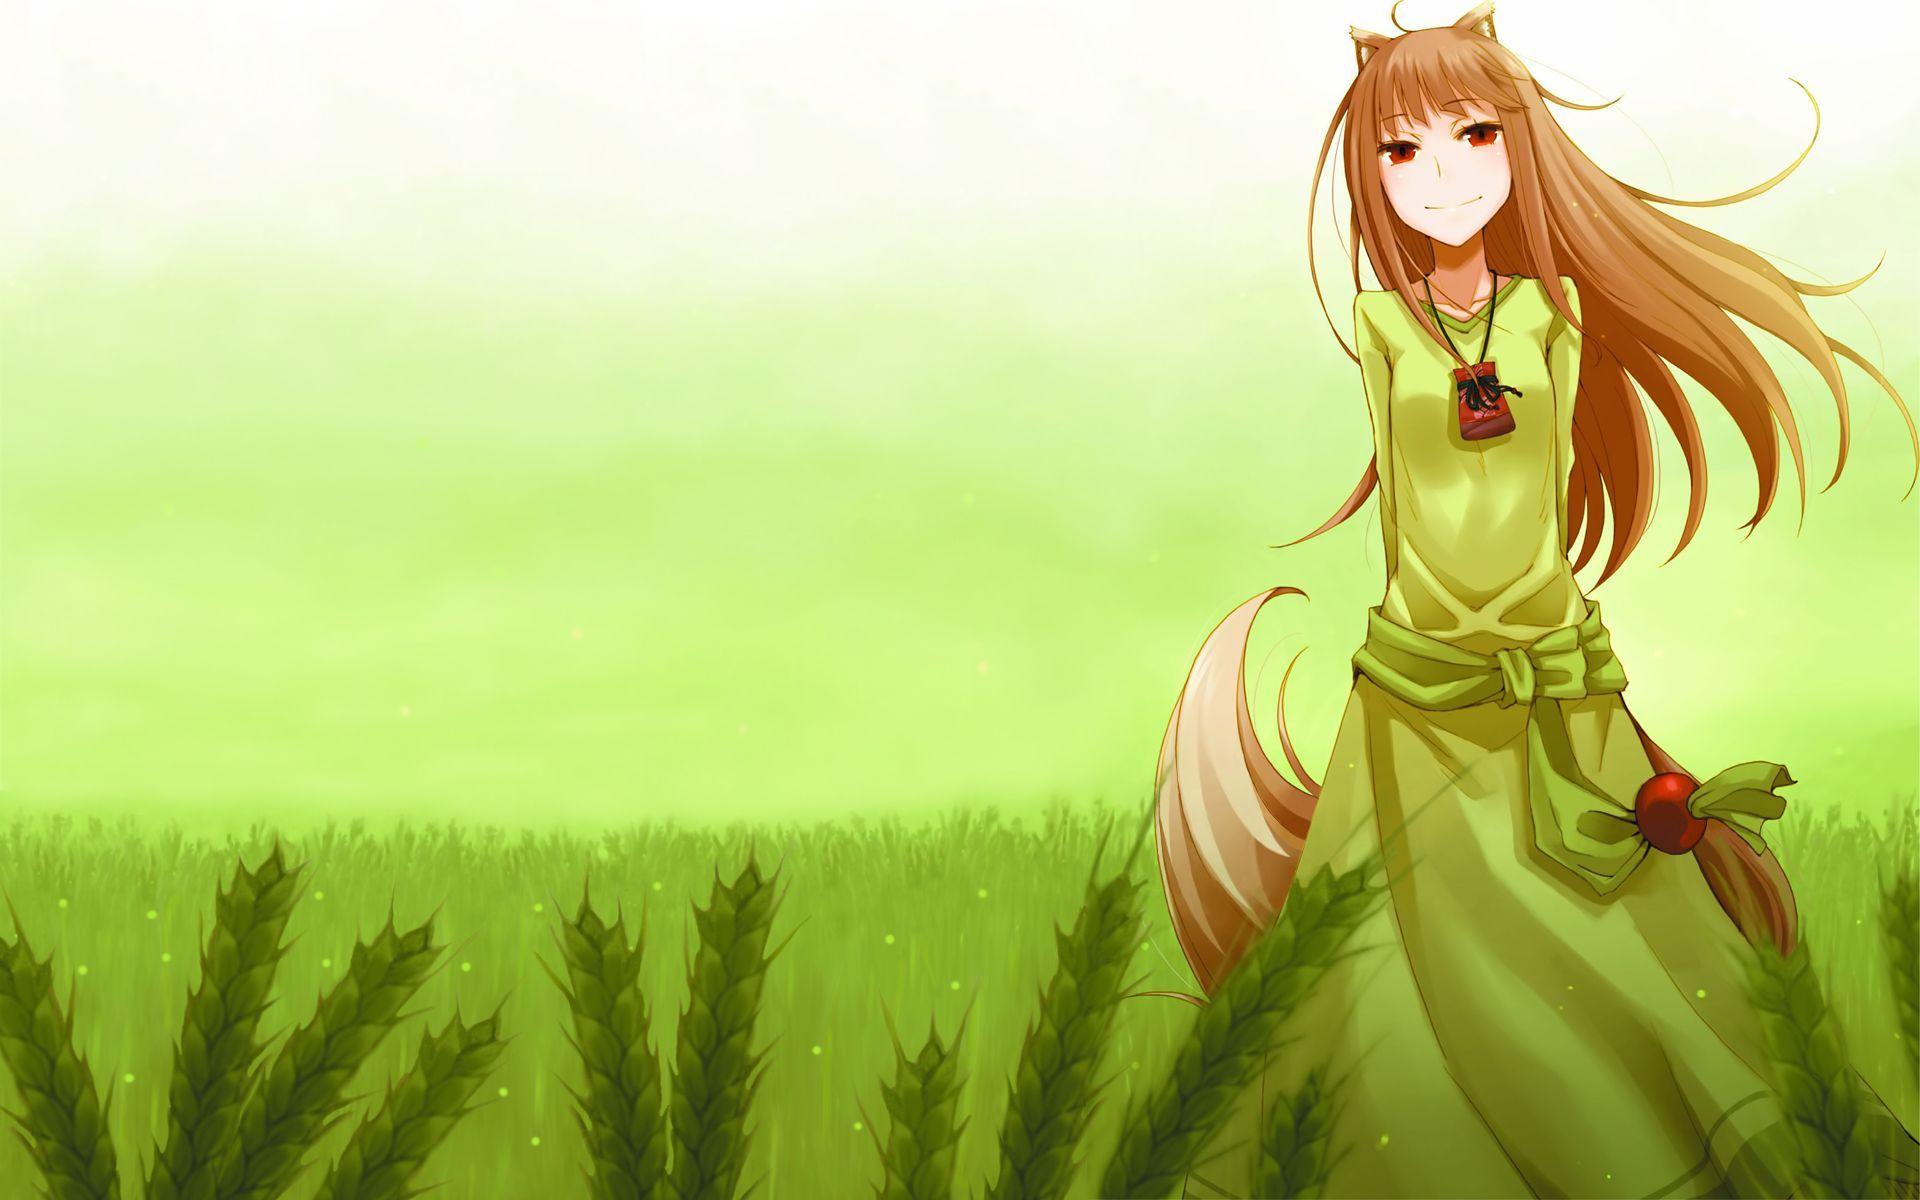 Holo The Wise Wolf Wallpaper